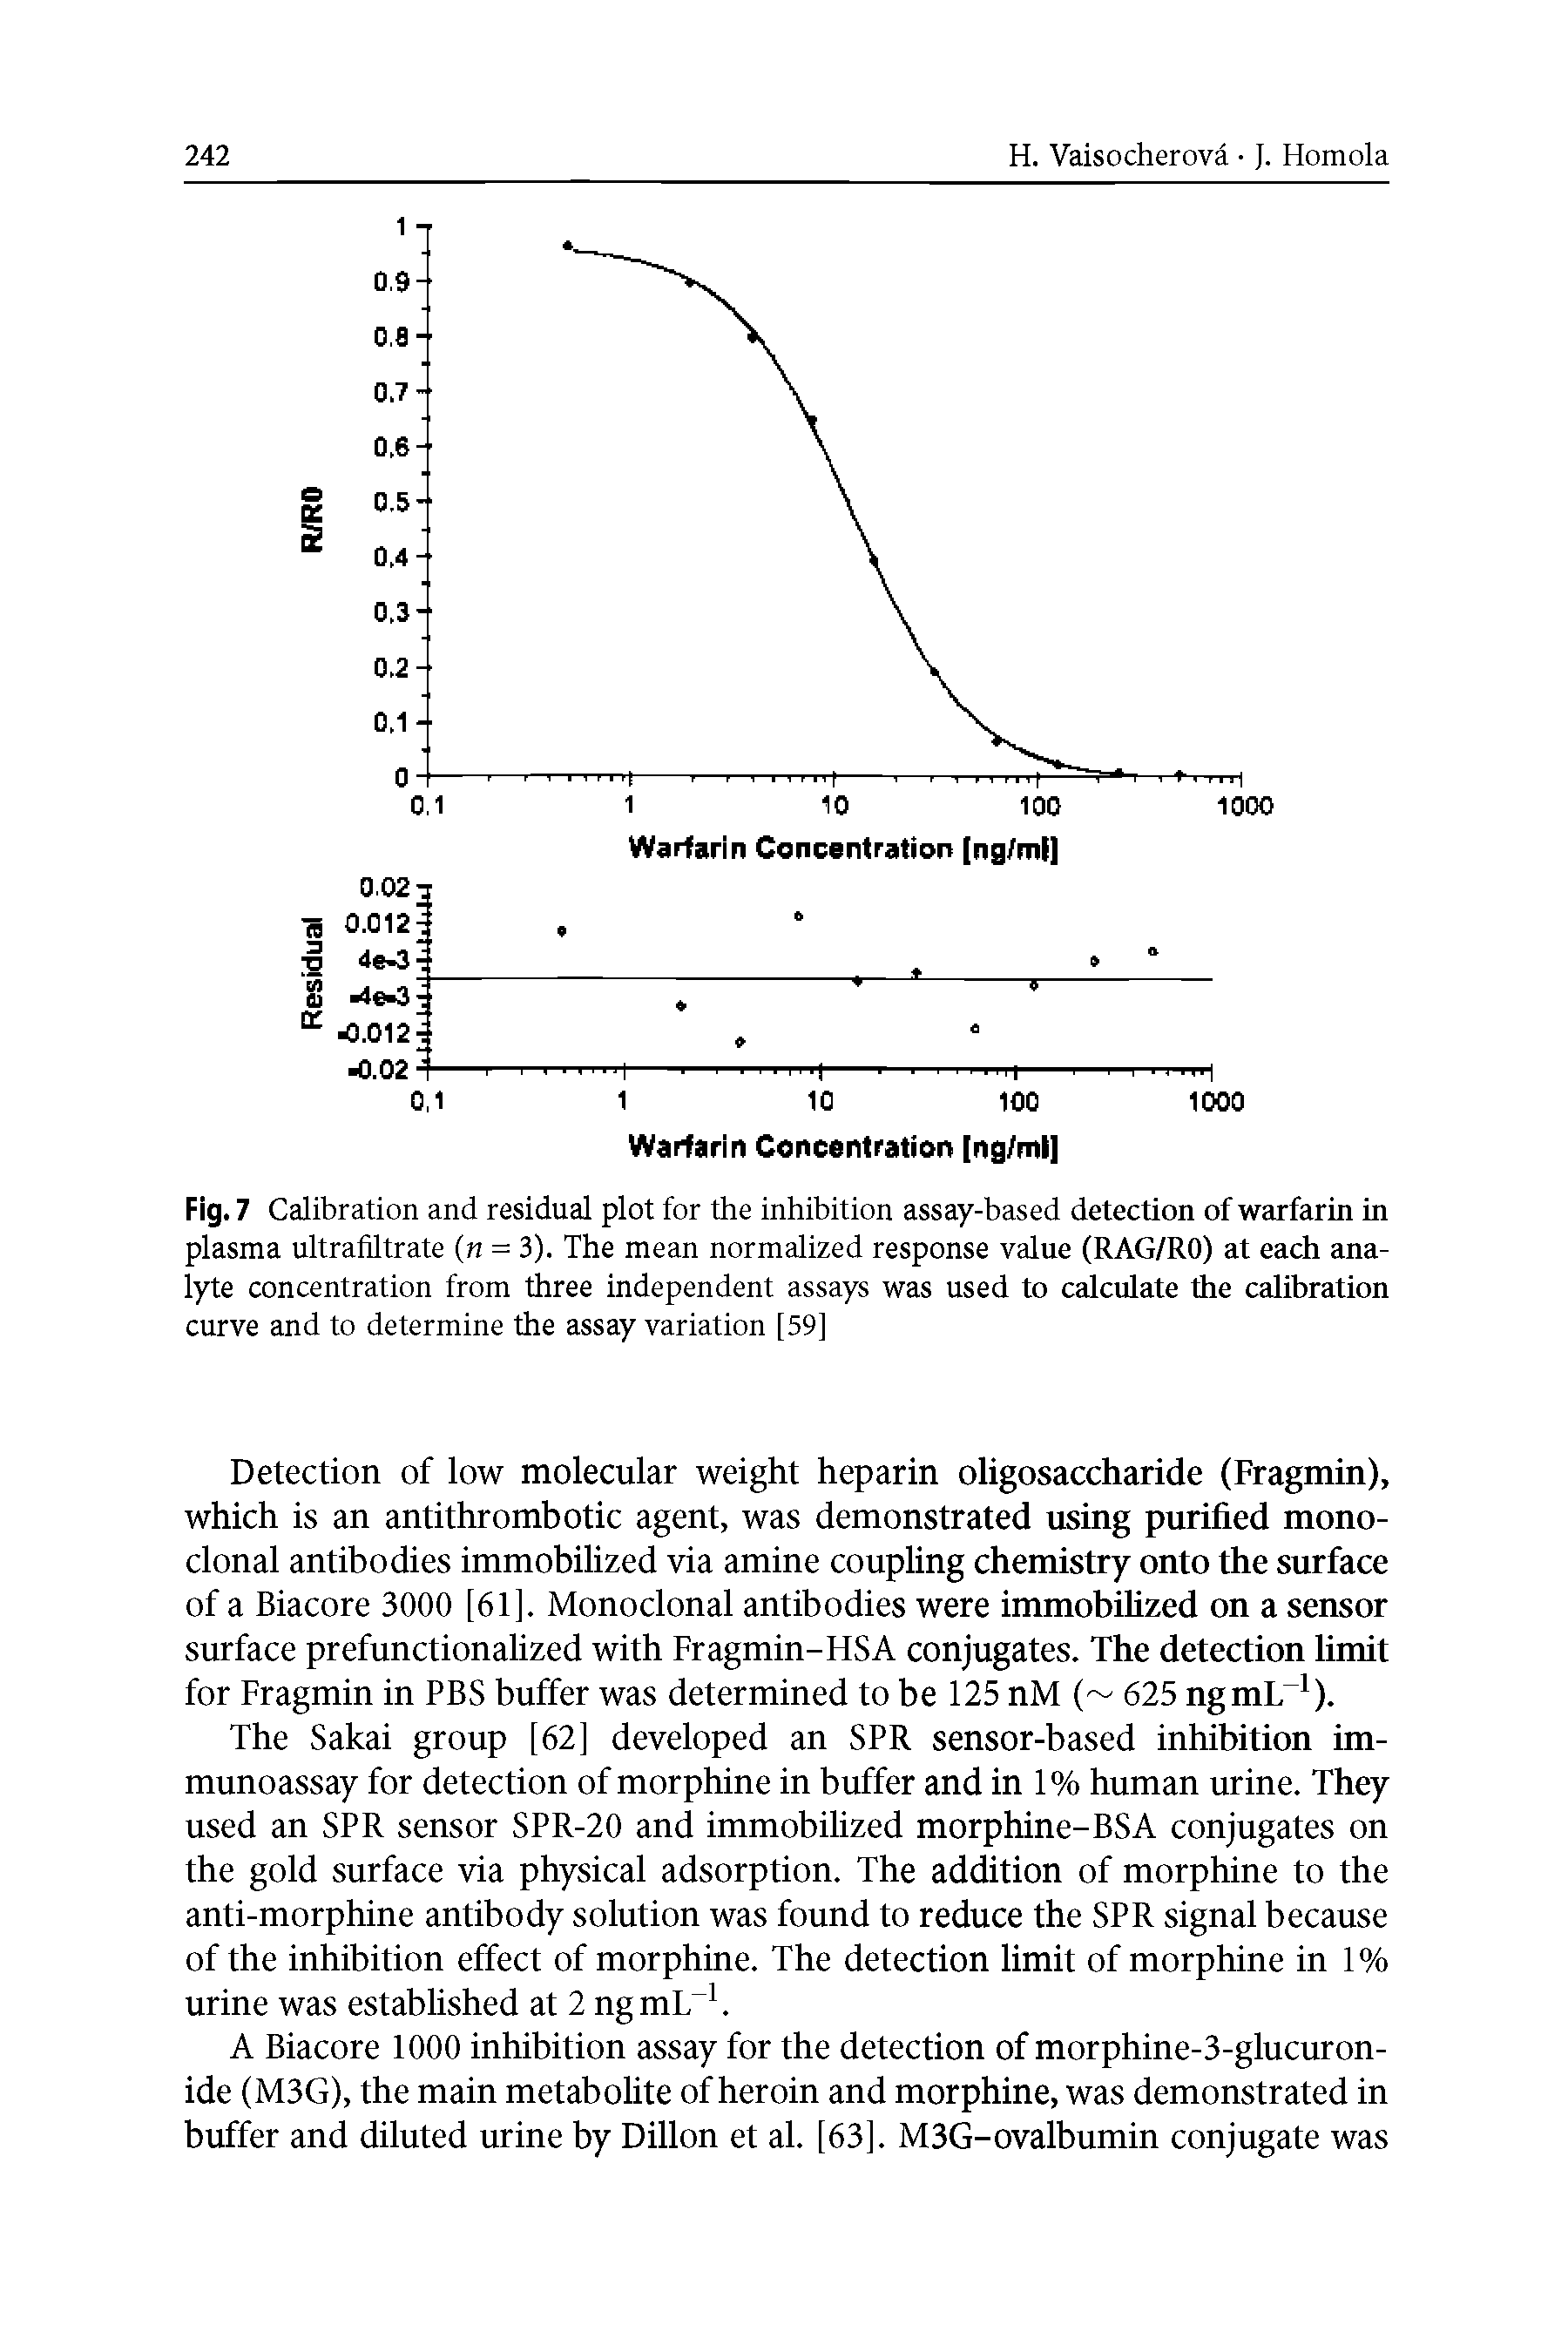 Fig. 7 Calibration and residual plot for the inhibition assay-based detection of warfarin in plasma ultrafiltrate ( = 3). The mean normalized response value (RAG/RO) at each analyte concentration from three independent assays was used to calculate the calibration curve and to determine the assay variation [59]...